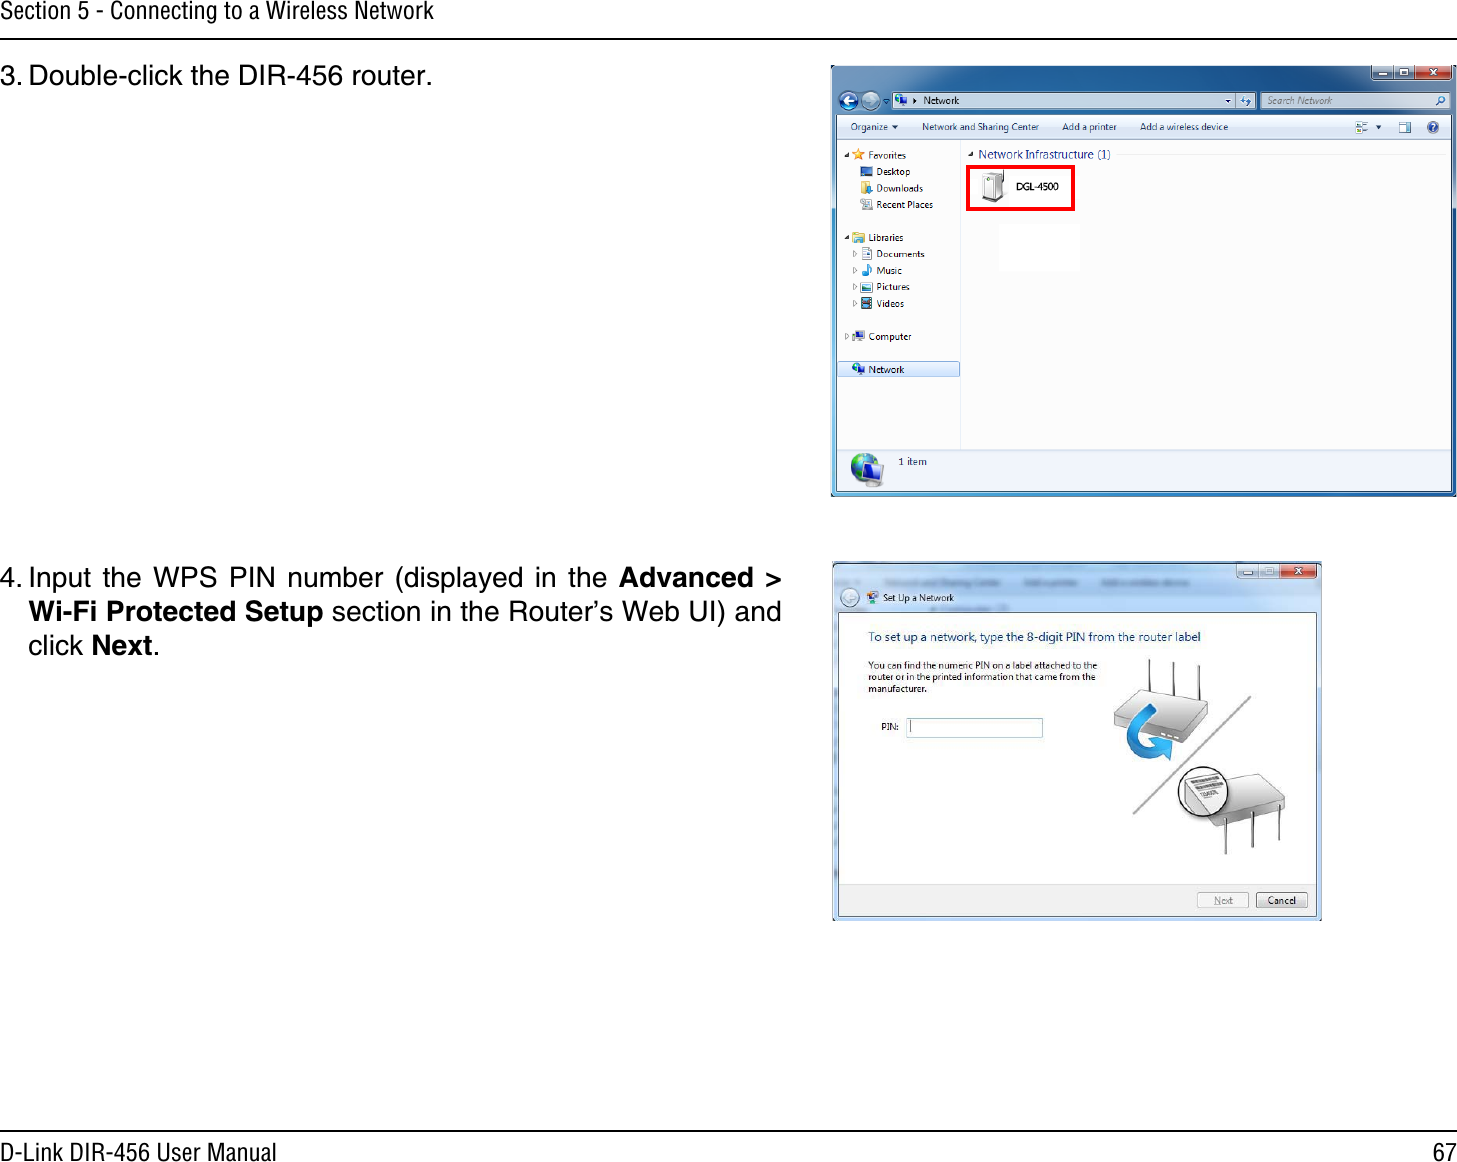 67D-Link DIR-456 User ManualSection 5 - Connecting to a Wireless Network3. Double-click the DIR-456 router.4. Input the WPS PIN number (displayed in the Advanced &gt; Wi-Fi Protected Setup section in the Router’s Web UI) and click Next.